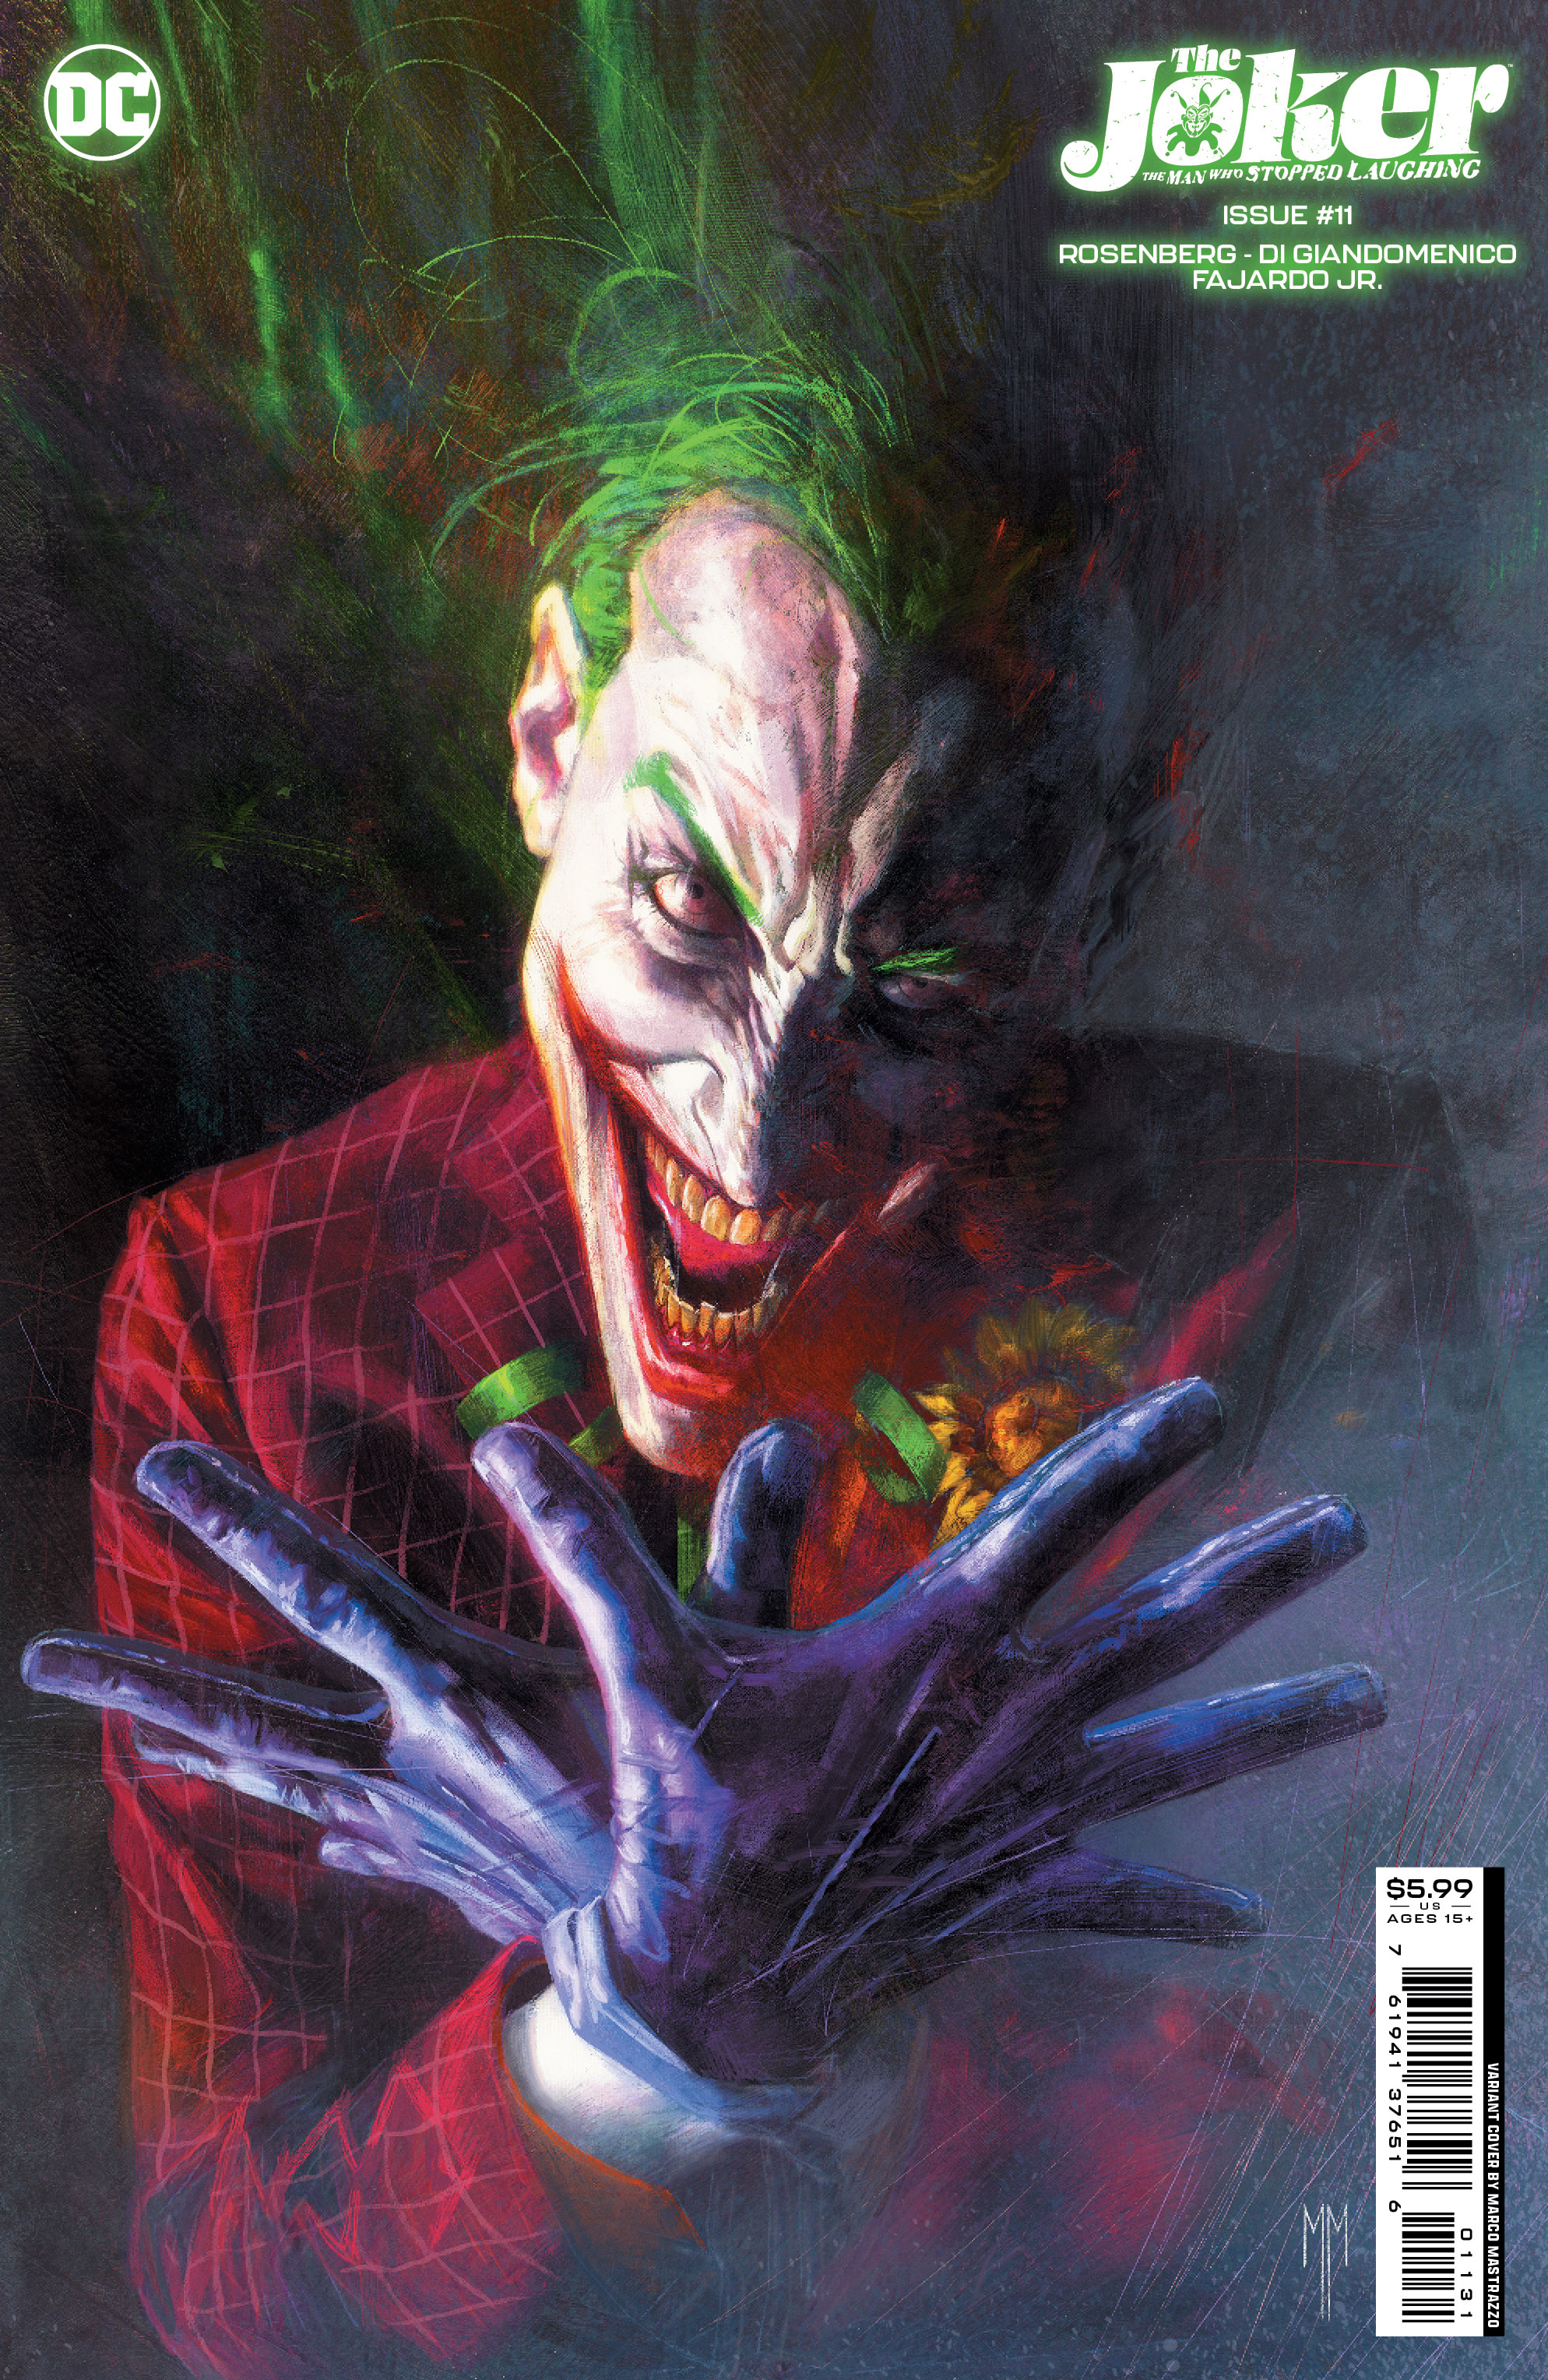 Joker The Man Who Stopped Laughing #11 Cover C Marco Mastrazzo Variant